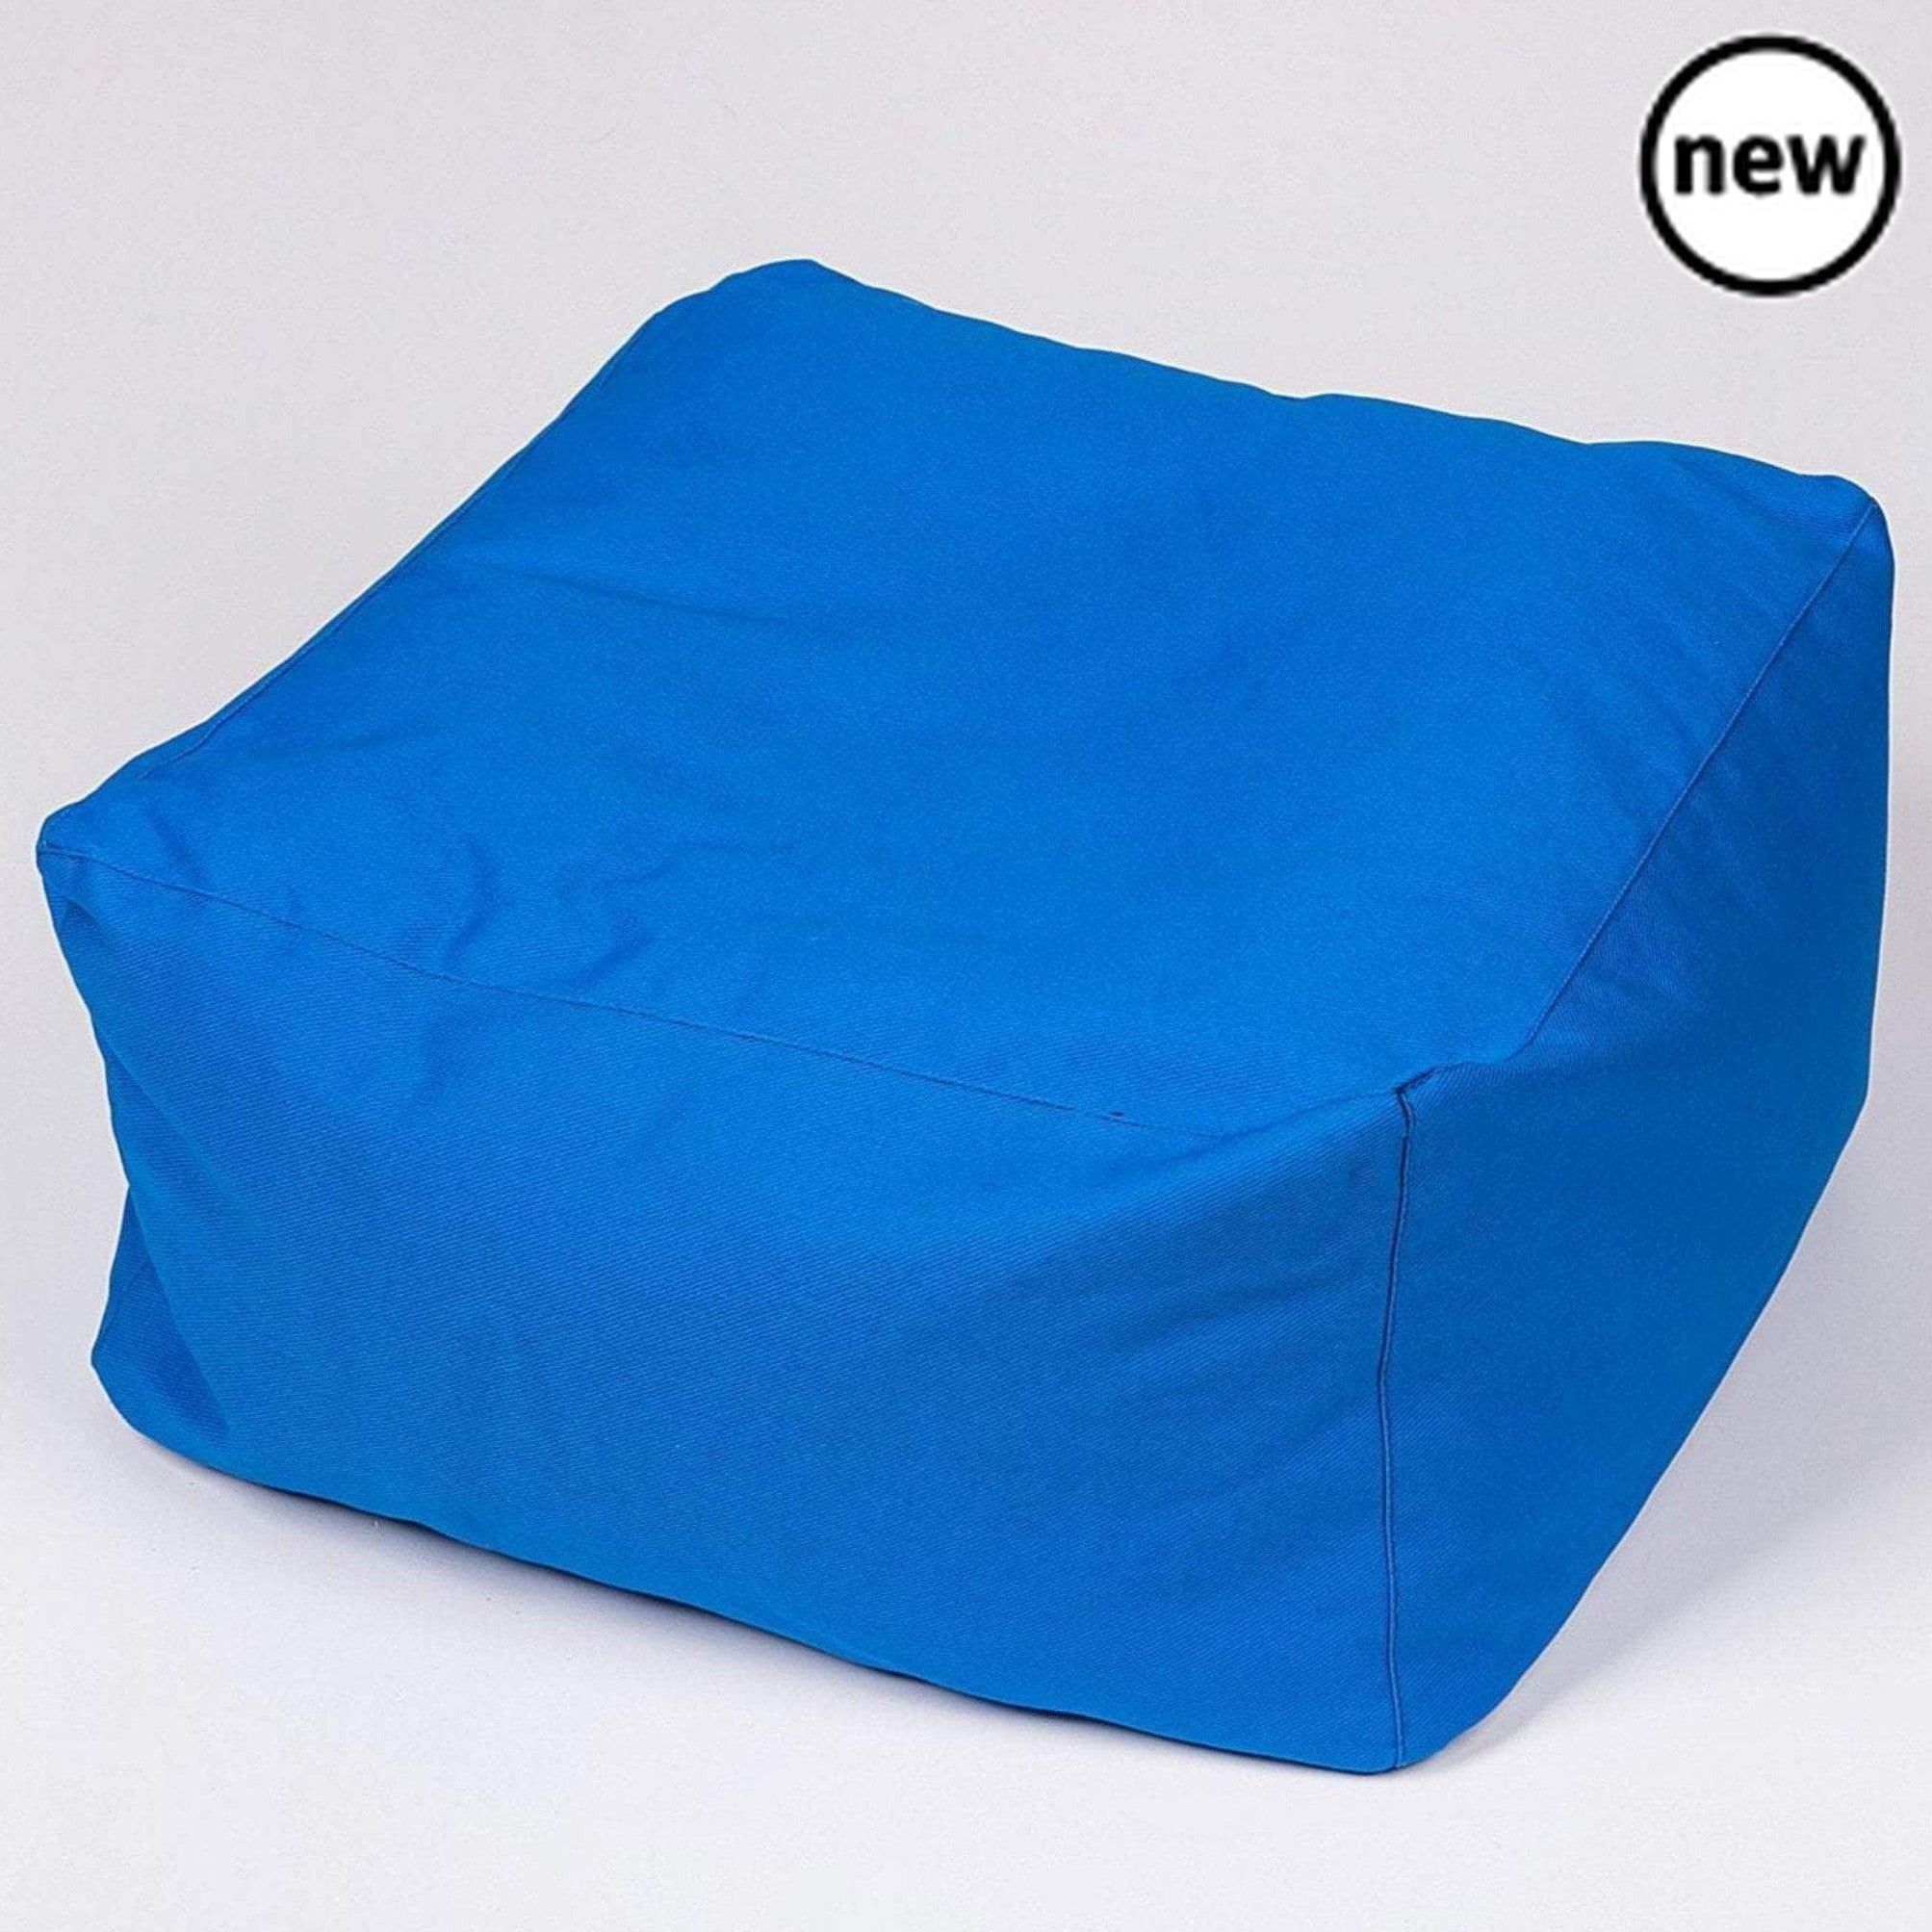 Cotton Square Poufs Set Of 12, Introducing our set of Cotton Square Poufs – a versatile and vibrant addition to any space. This set includes 12 pouffes, featuring two in each color or as per your specific request, providing endless possibilities for creative and functional use. Specifications: Size: 40x40x20cm Fabric: 100% Cotton Filling: Polystyrene balls Versatile Usage: The Cotton Square Poufs offer a multitude of uses, from comfortable floor pillows to footpaths, creative building blocks, and even engag